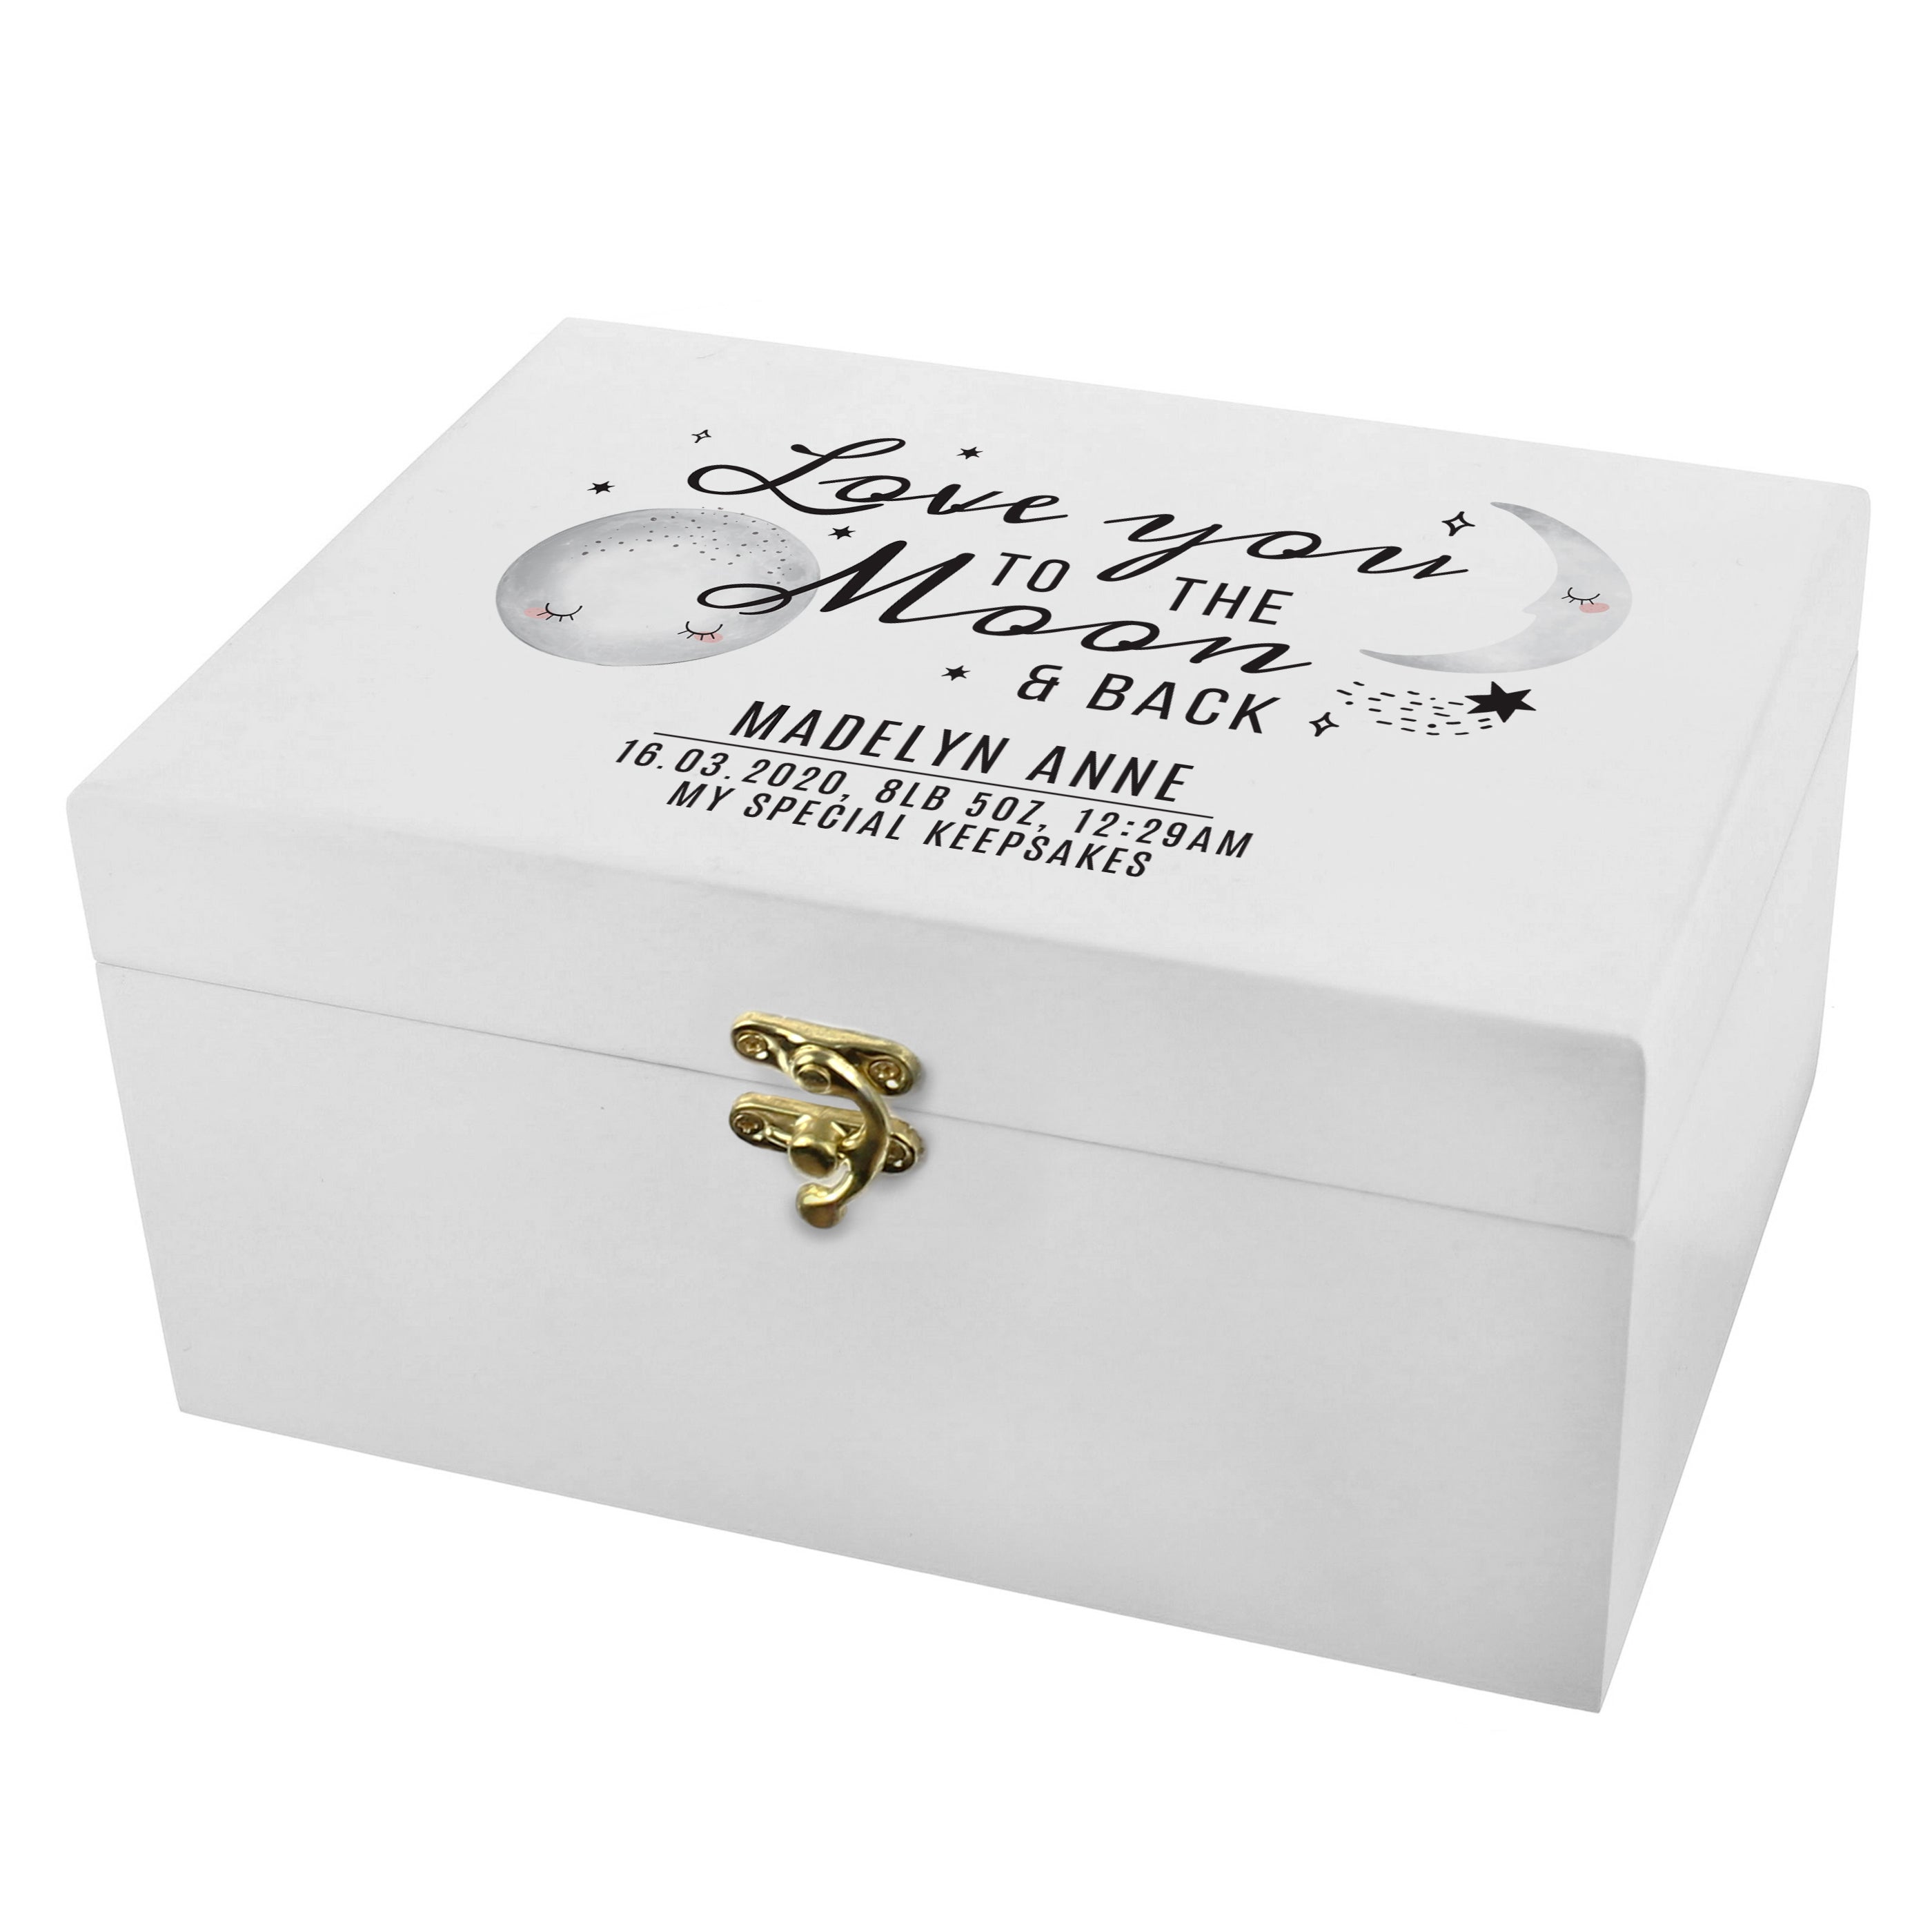 Monochrome Collection – Out The Box Baby Gifts